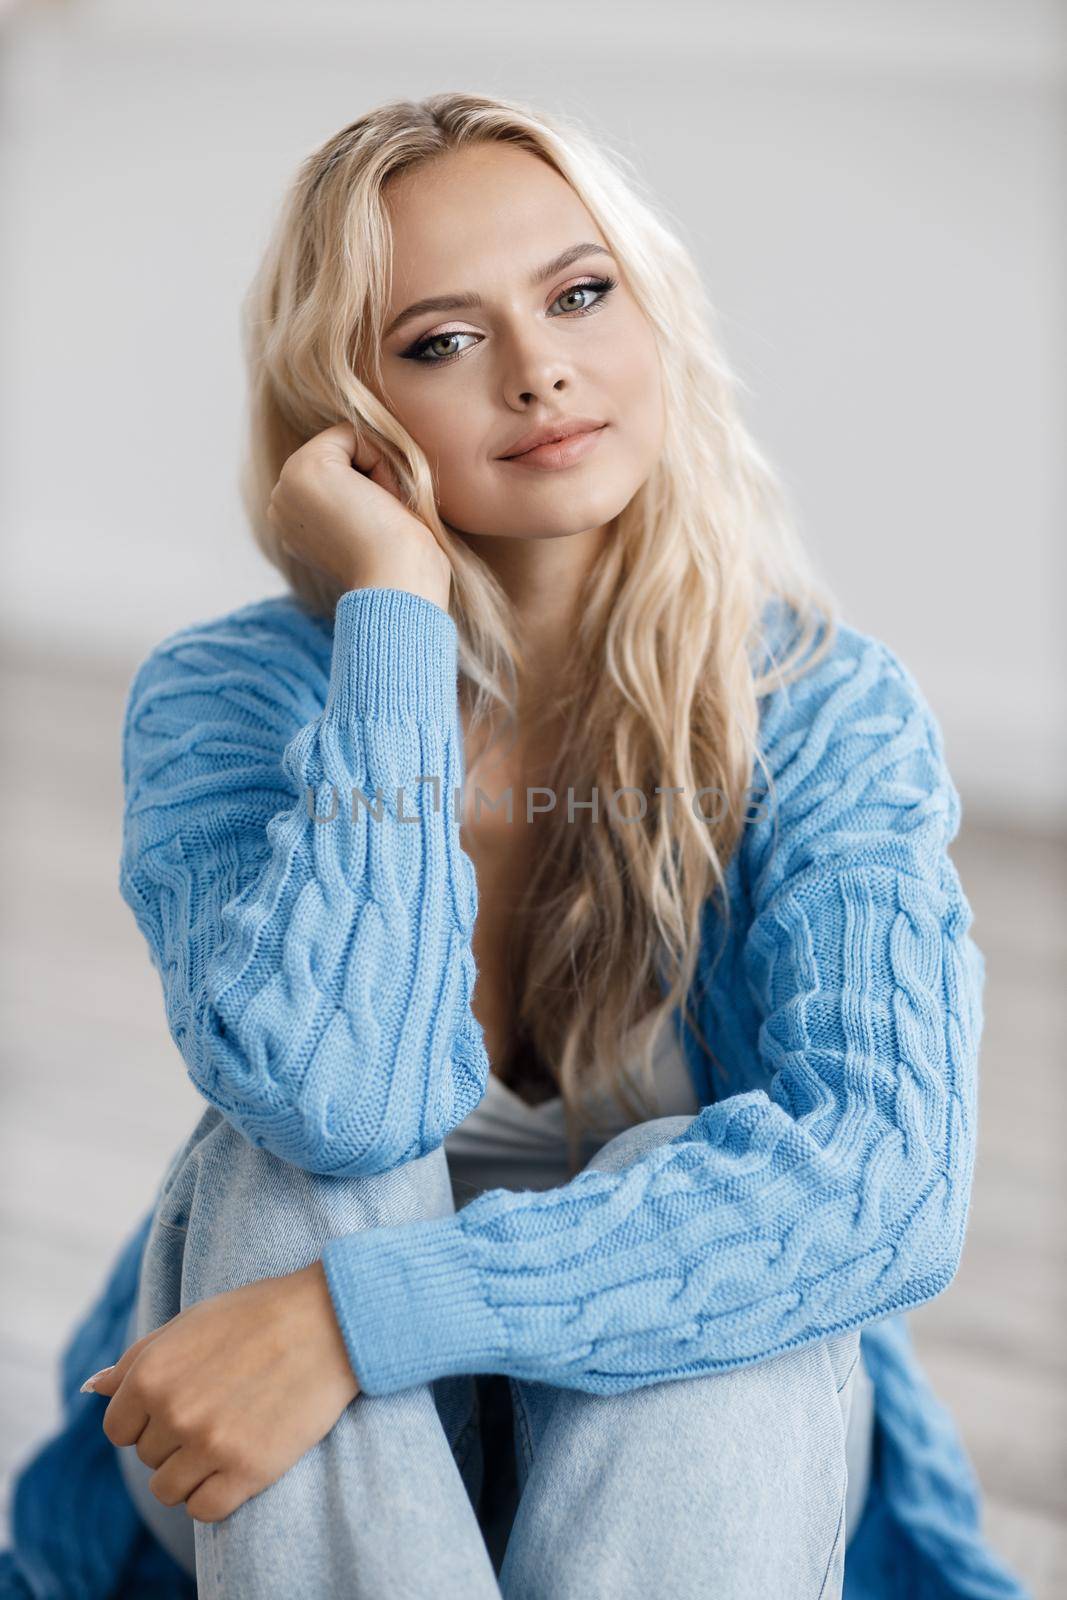 Young beautiful blond woman portrait indoor by splash